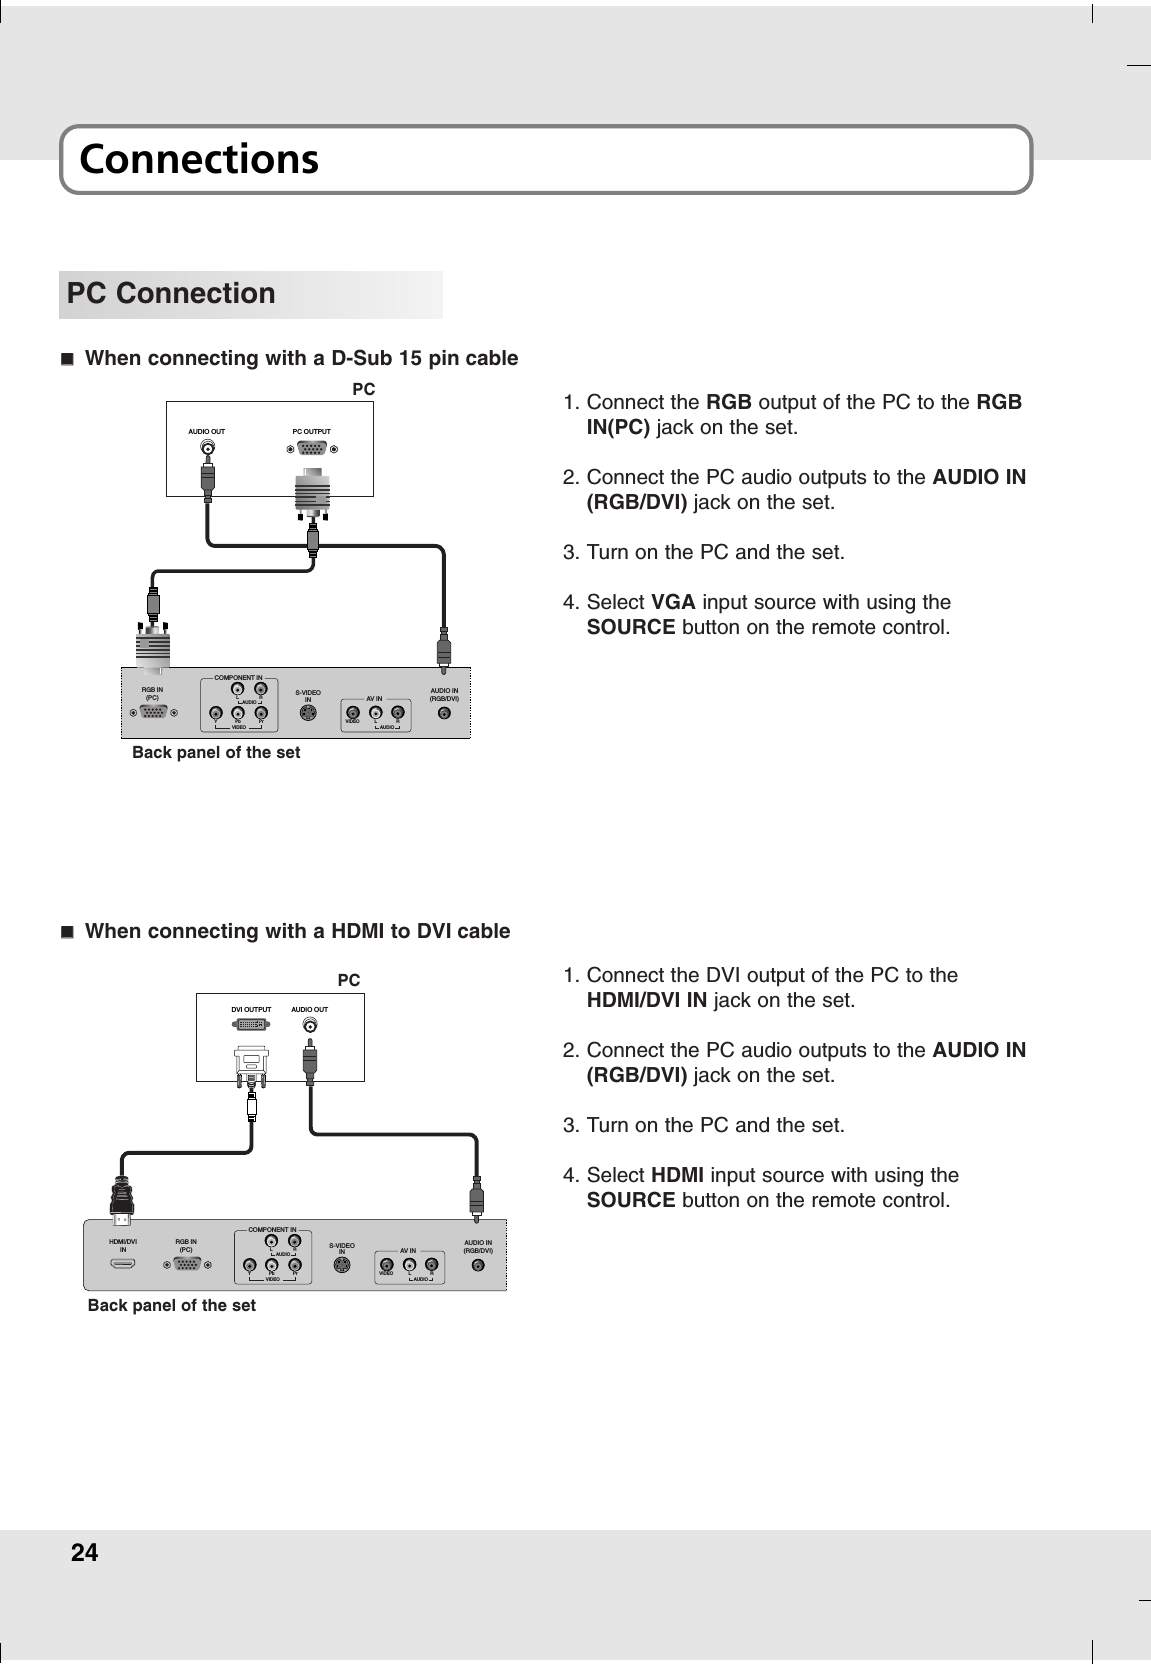 24ConnectionsPC ConnectionHDMI/DVIINRGB IN(PC)AUDIO IN(RGB/DVI)S-VIDEOINVIDEOYPb PrLRCOMPONENT INAUDIO AV INAUDIOLVIDEO RDVI OUTPUT AUDIO OUT1. Connect the DVI output of the PC to theHDMI/DVI IN jack on the set.2. Connect the PC audio outputs to the AUDIO IN(RGB/DVI) jack on the set.3. Turn on the PC and the set.4. Select HDMI input source with using theSOURCE button on the remote control.AAWhen connecting with a HDMI to DVI cableRGB IN(PC)AUDIO IN(RGB/DVI)S-VIDEOINVIDEOYPb PrLRCOMPONENT INAUDIO AV I NAUDIOLVIDEO RAUDIO OUT PC OUTPUT1. Connect the RGB output of the PC to the RGBIN(PC) jack on the set.2. Connect the PC audio outputs to the AUDIO IN(RGB/DVI) jack on the set.3. Turn on the PC and the set.4. Select VGA input source with using theSOURCE button on the remote control.AAWhen connecting with a D-Sub 15 pin cablePCBack panel of the setPCBack panel of the set